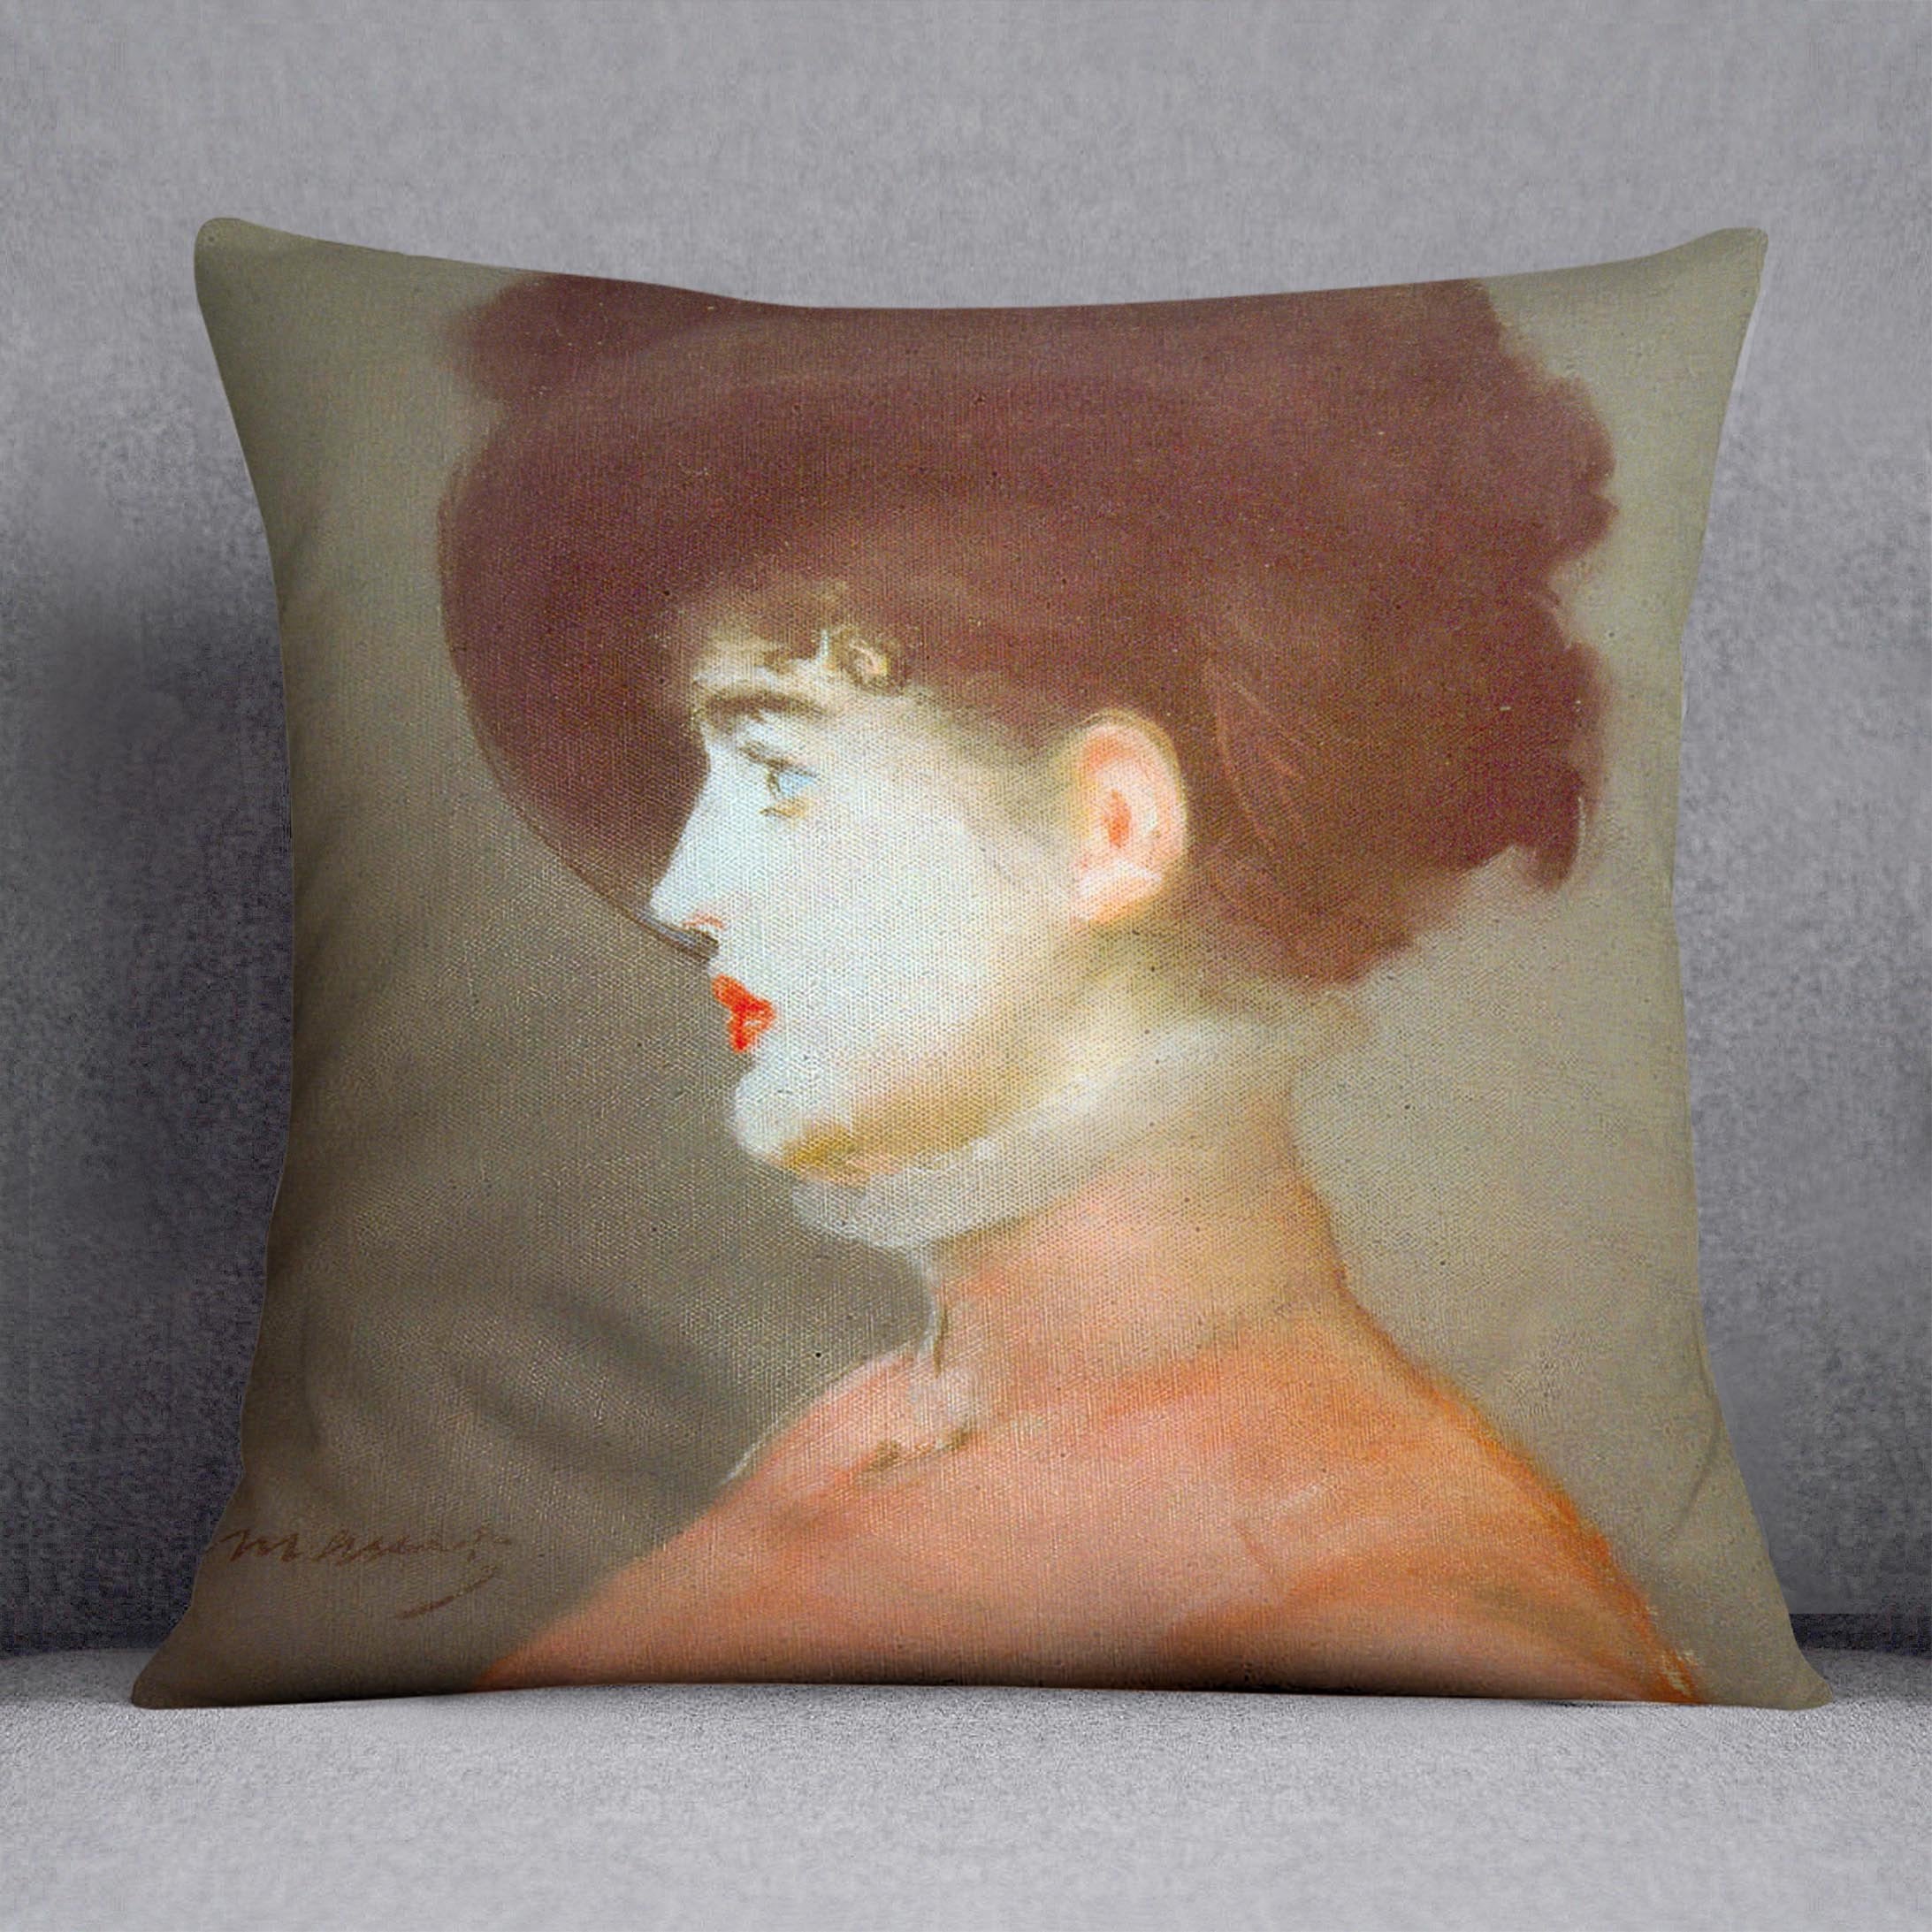 Irma Brunne by Manet Throw Pillow